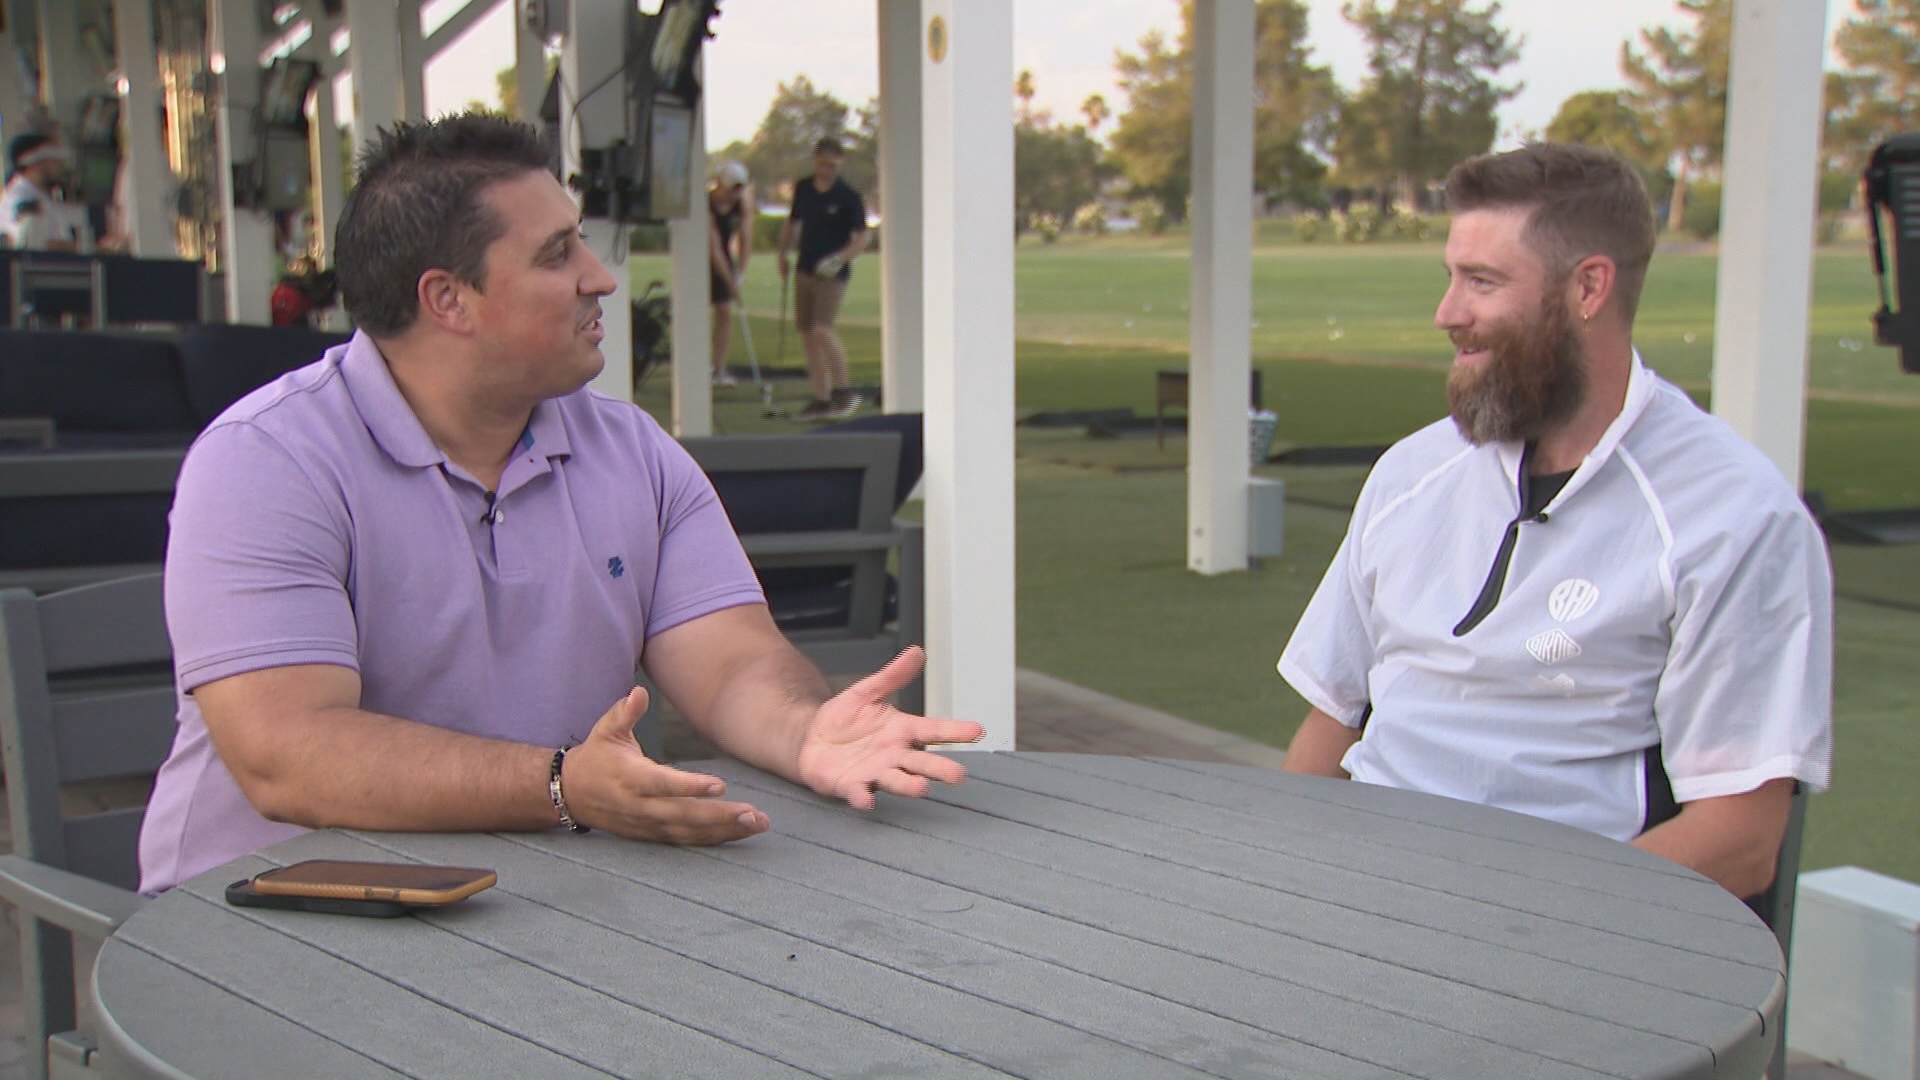 Archie Bradley is one of the most popular Arizona Diamondbacks players the past decade. Now Bradley and his famous beard are back in the Valley with a golf job.